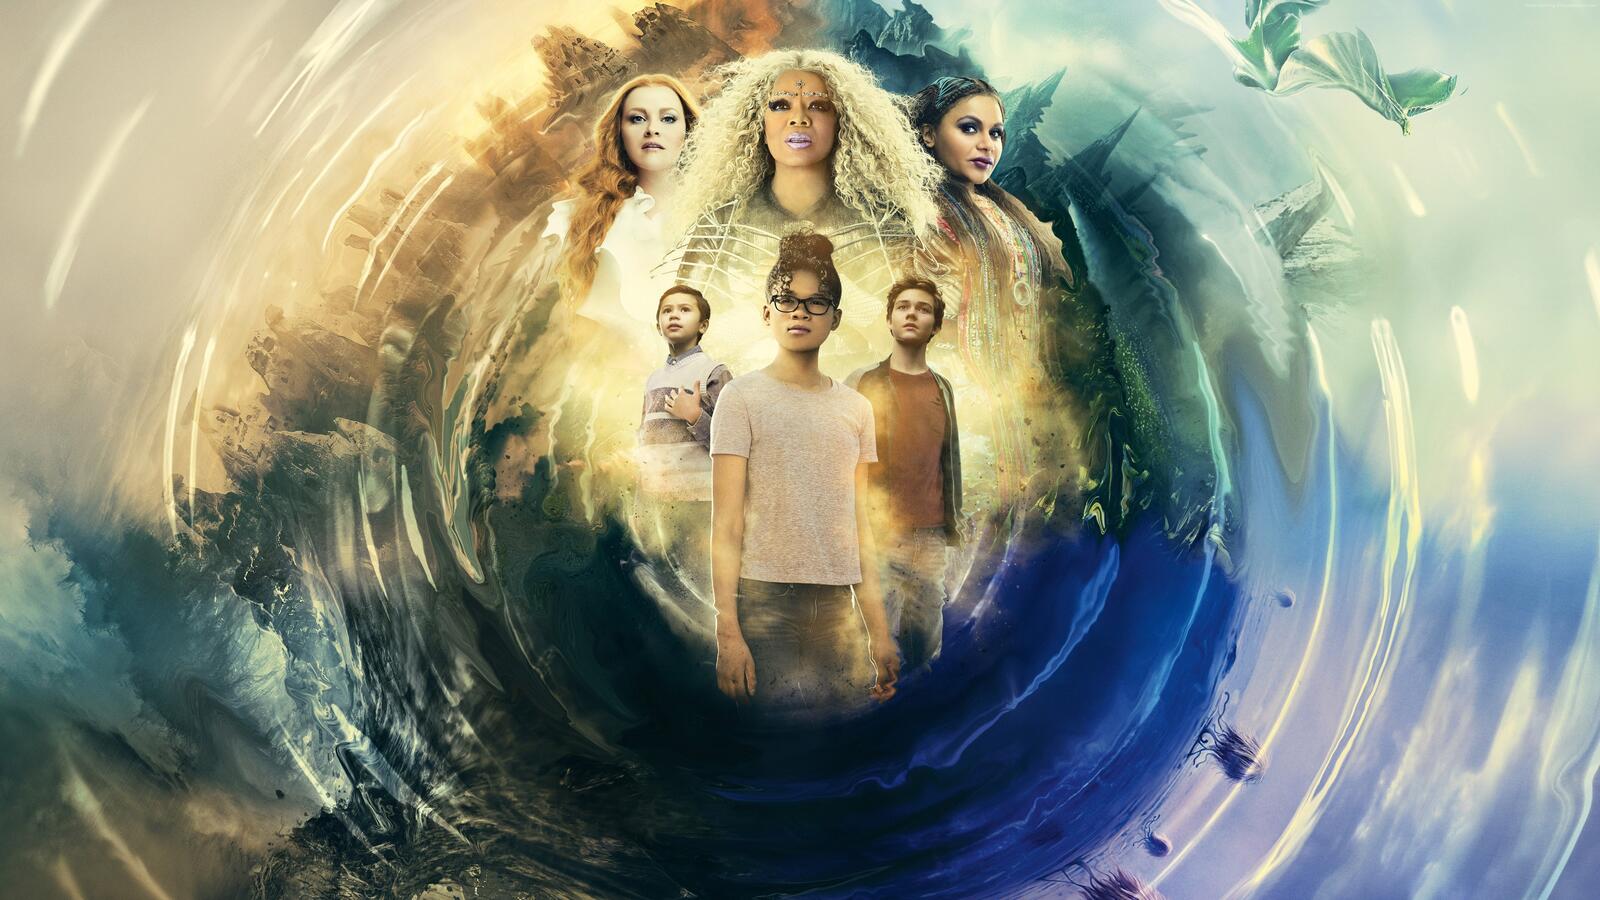 Wallpapers a wrinkle in time disney 2018 movies on the desktop